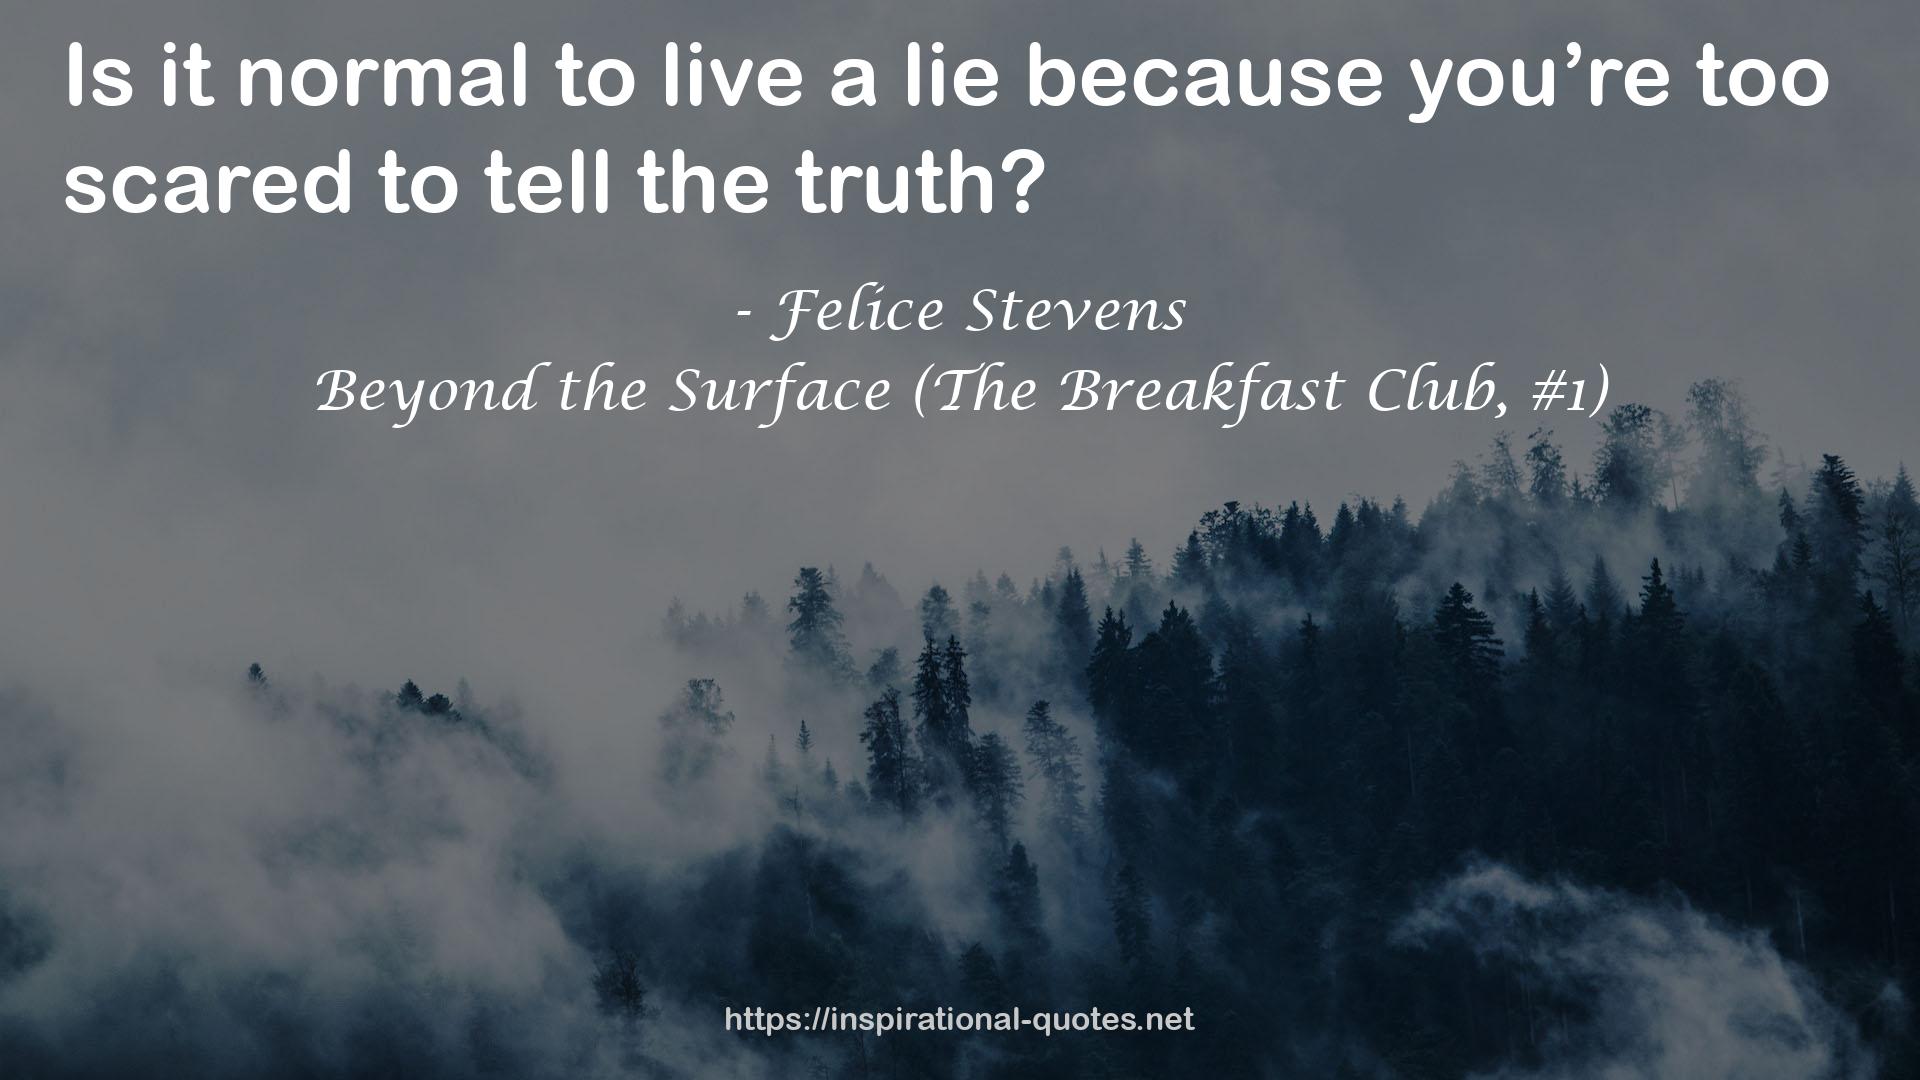 Beyond the Surface (The Breakfast Club, #1) QUOTES